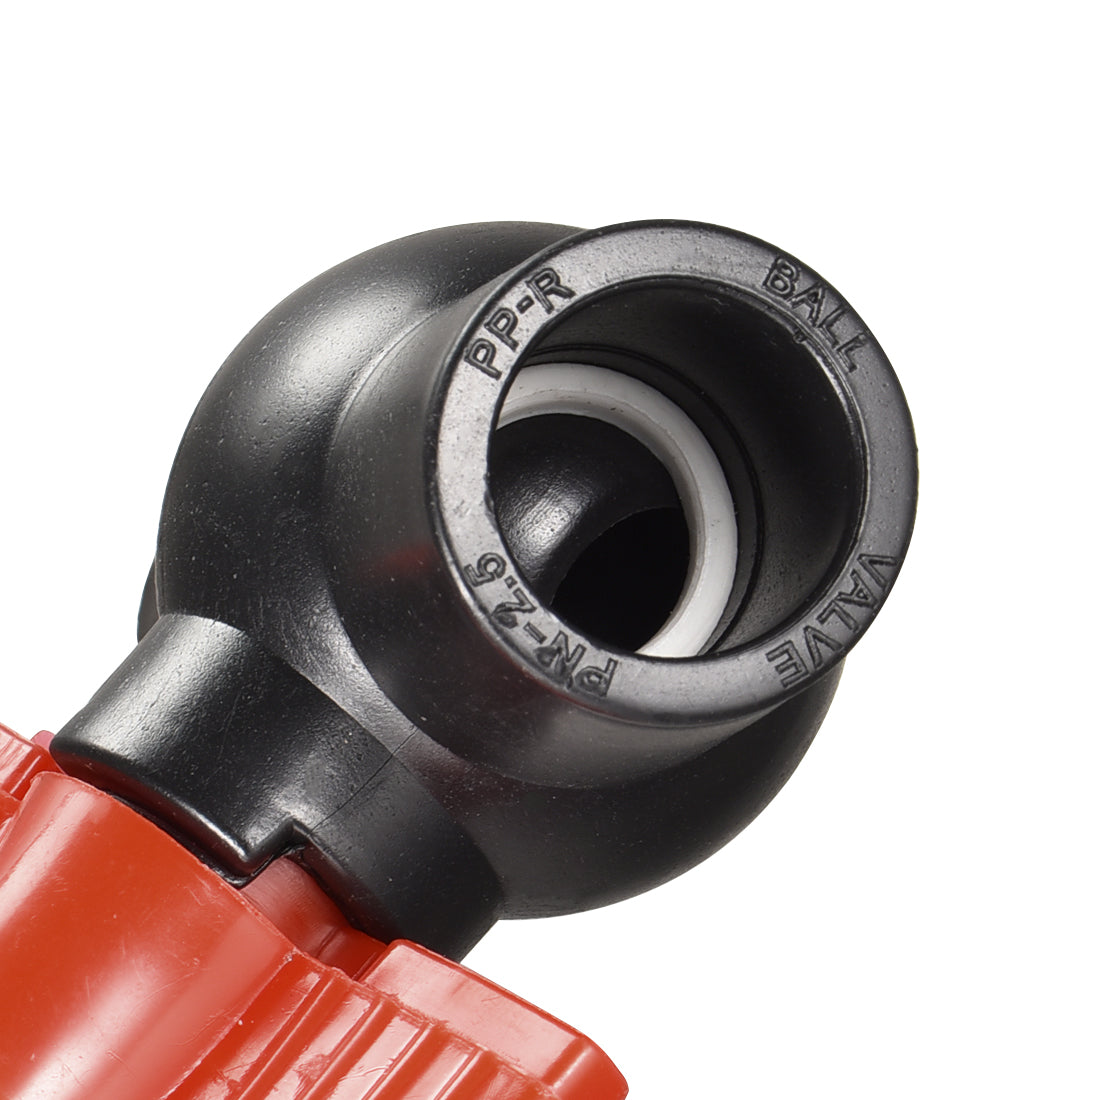 Uxcell Uxcell Ball Valve, 40mm Inner Diameter, Socket Type, for Control Water Flow, PE Black Red 2Pcs